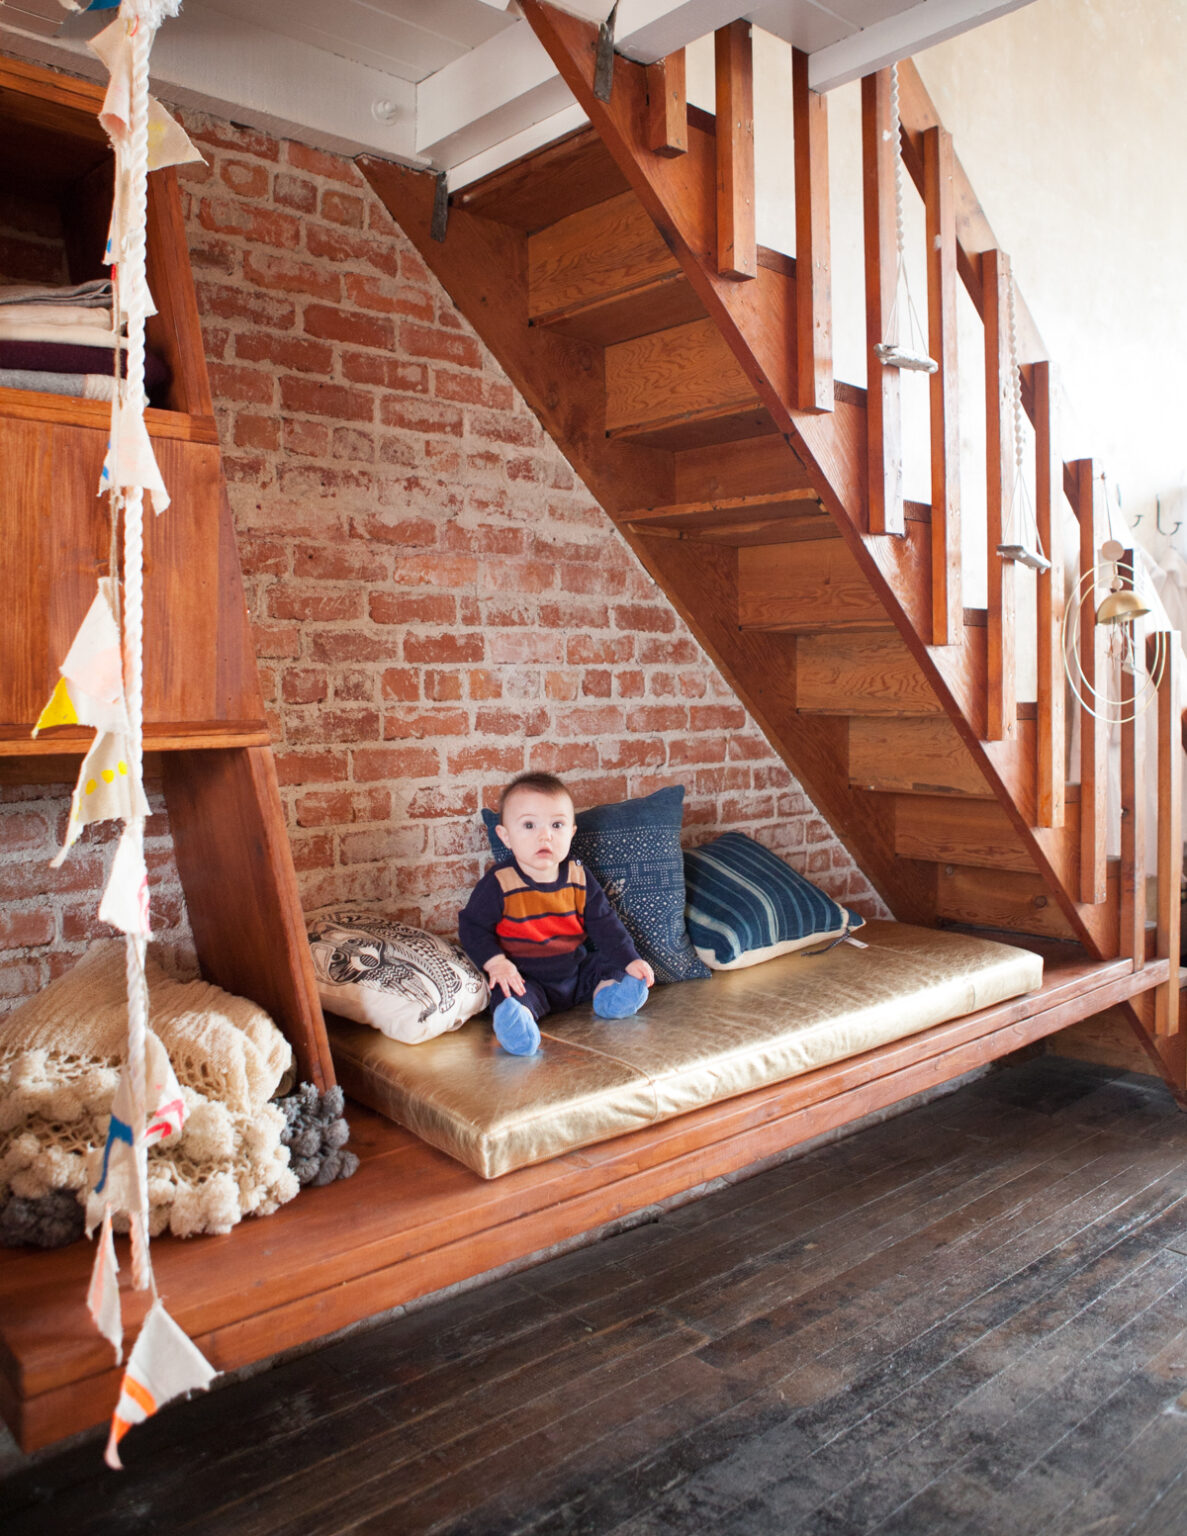 Baby sitting up in a nook under a stairway made of a wooden floating bench and a metallic gold banquette pillow